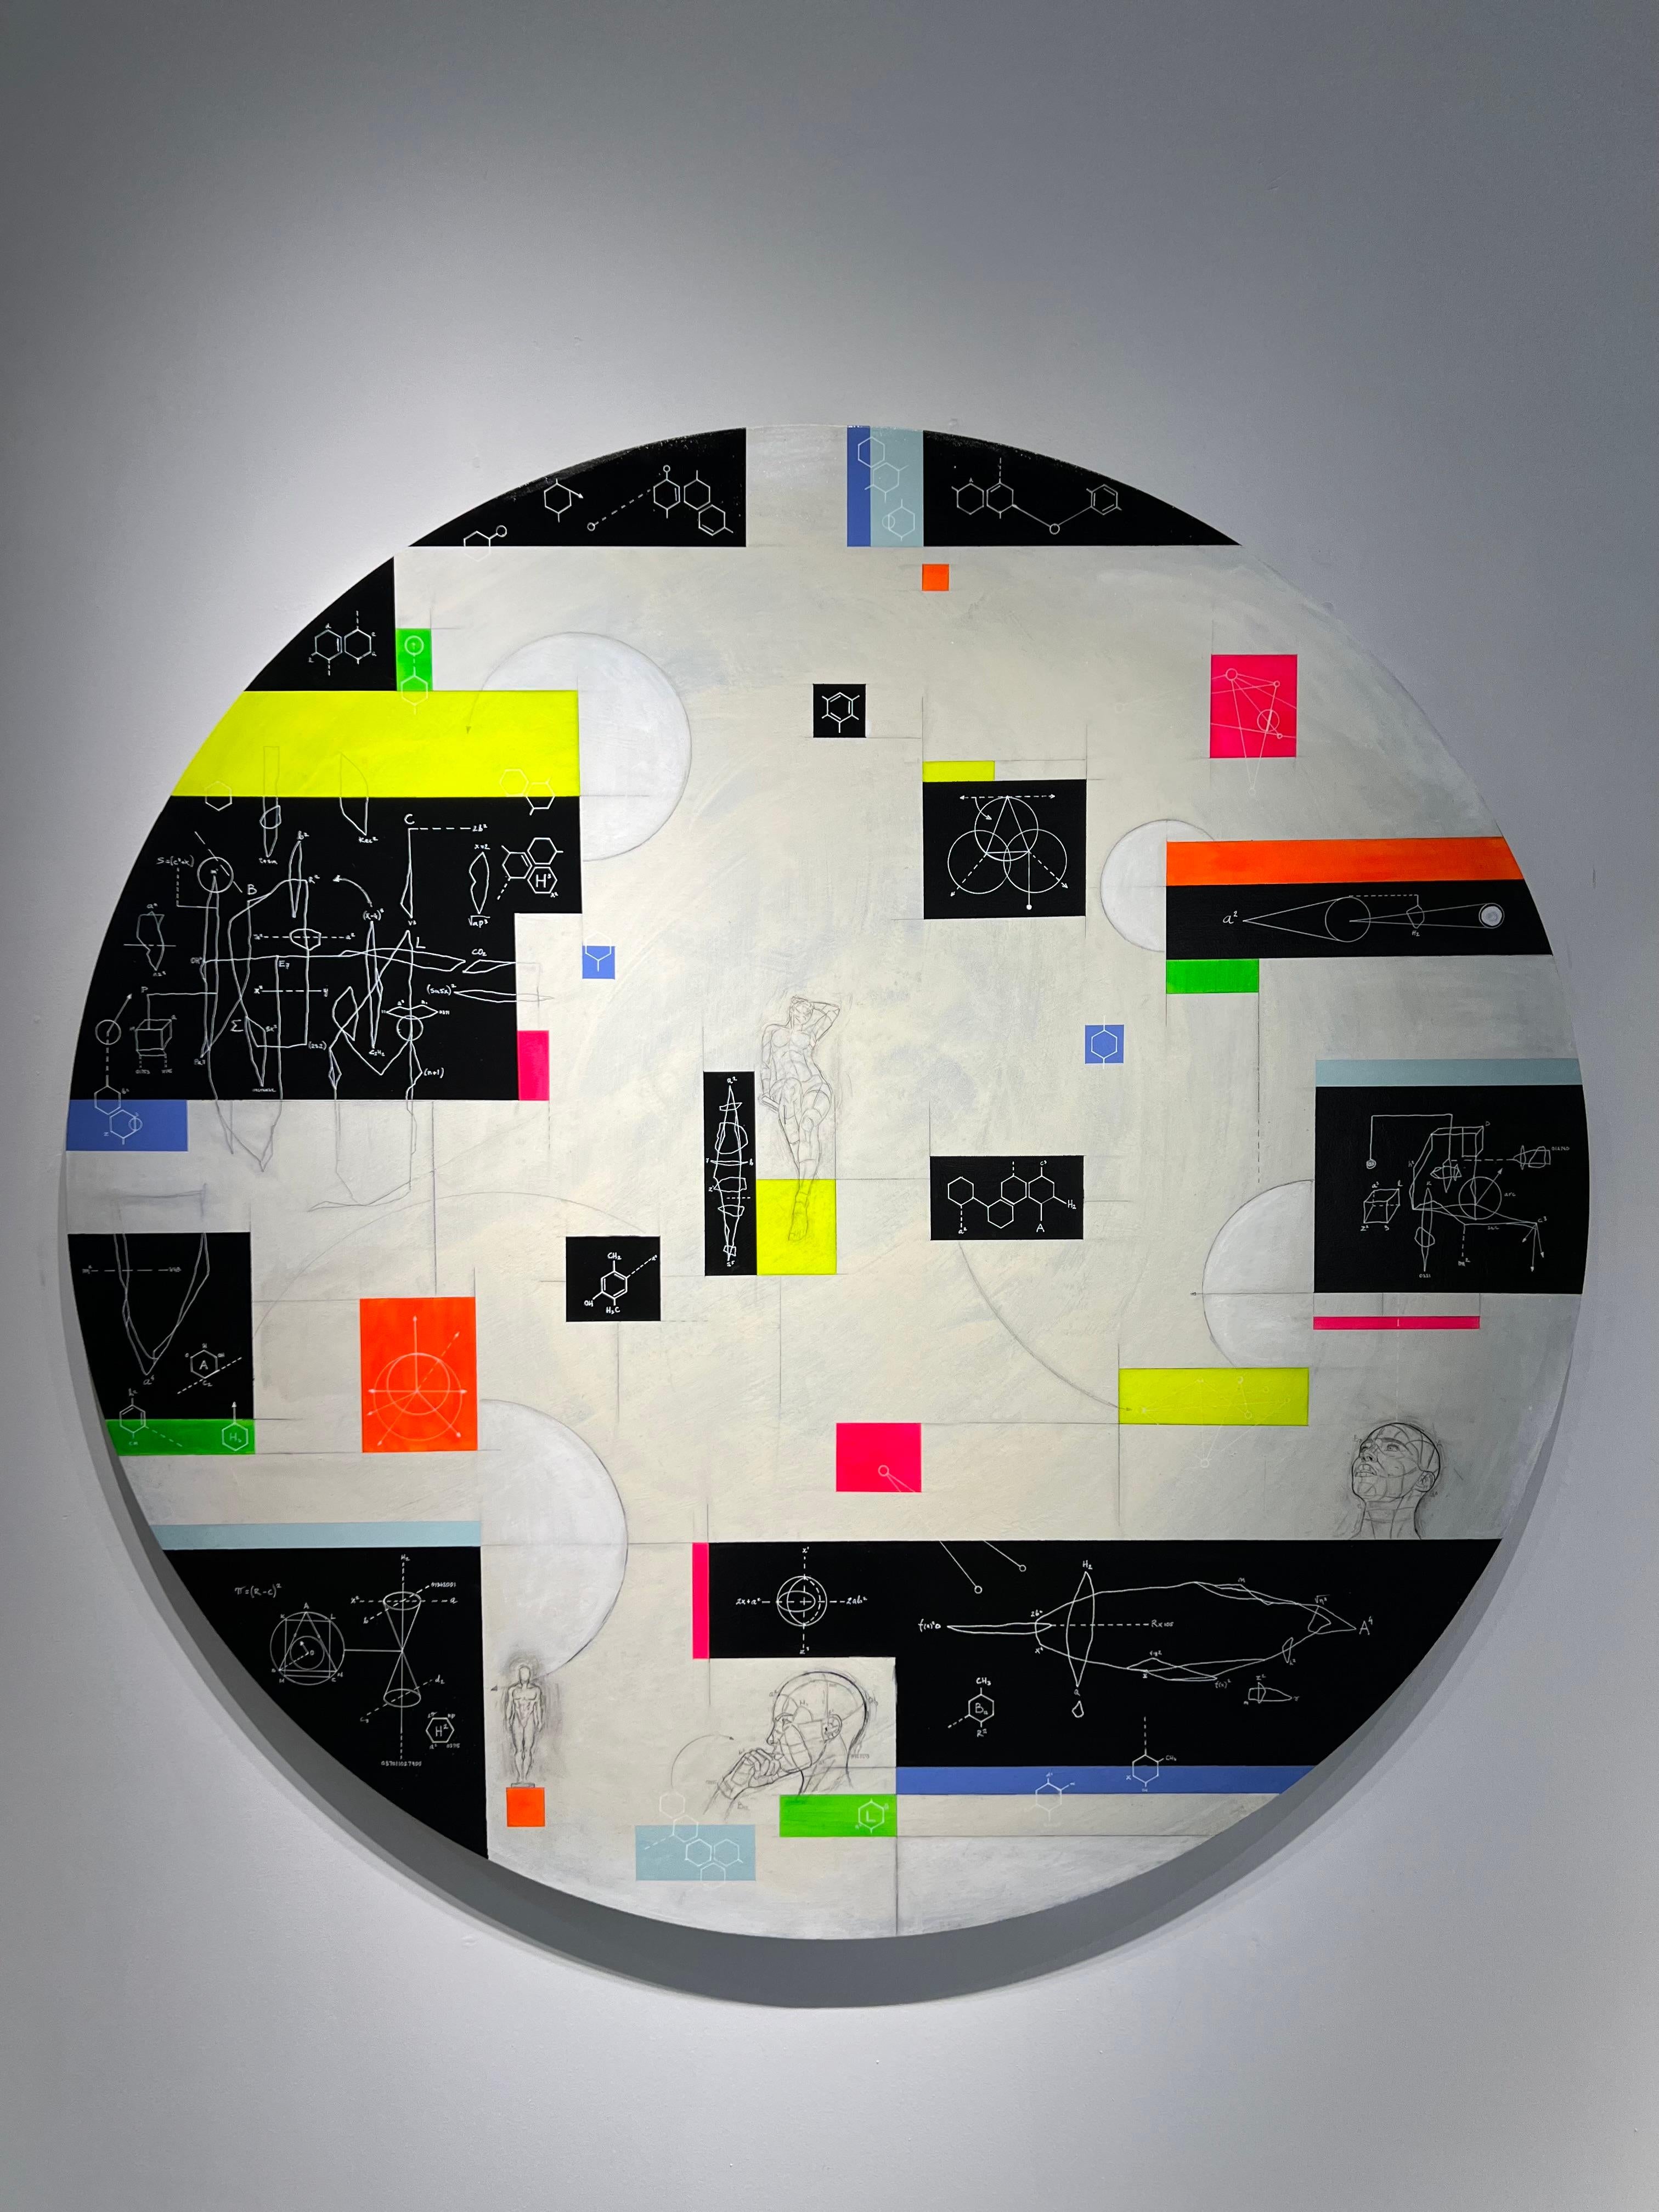 Noon Spiegel
Untitled
Acrylic paint, pencil, ink, and oil sticks on canvas
Diameter 60 inches (152.4 cm)
Piece unique